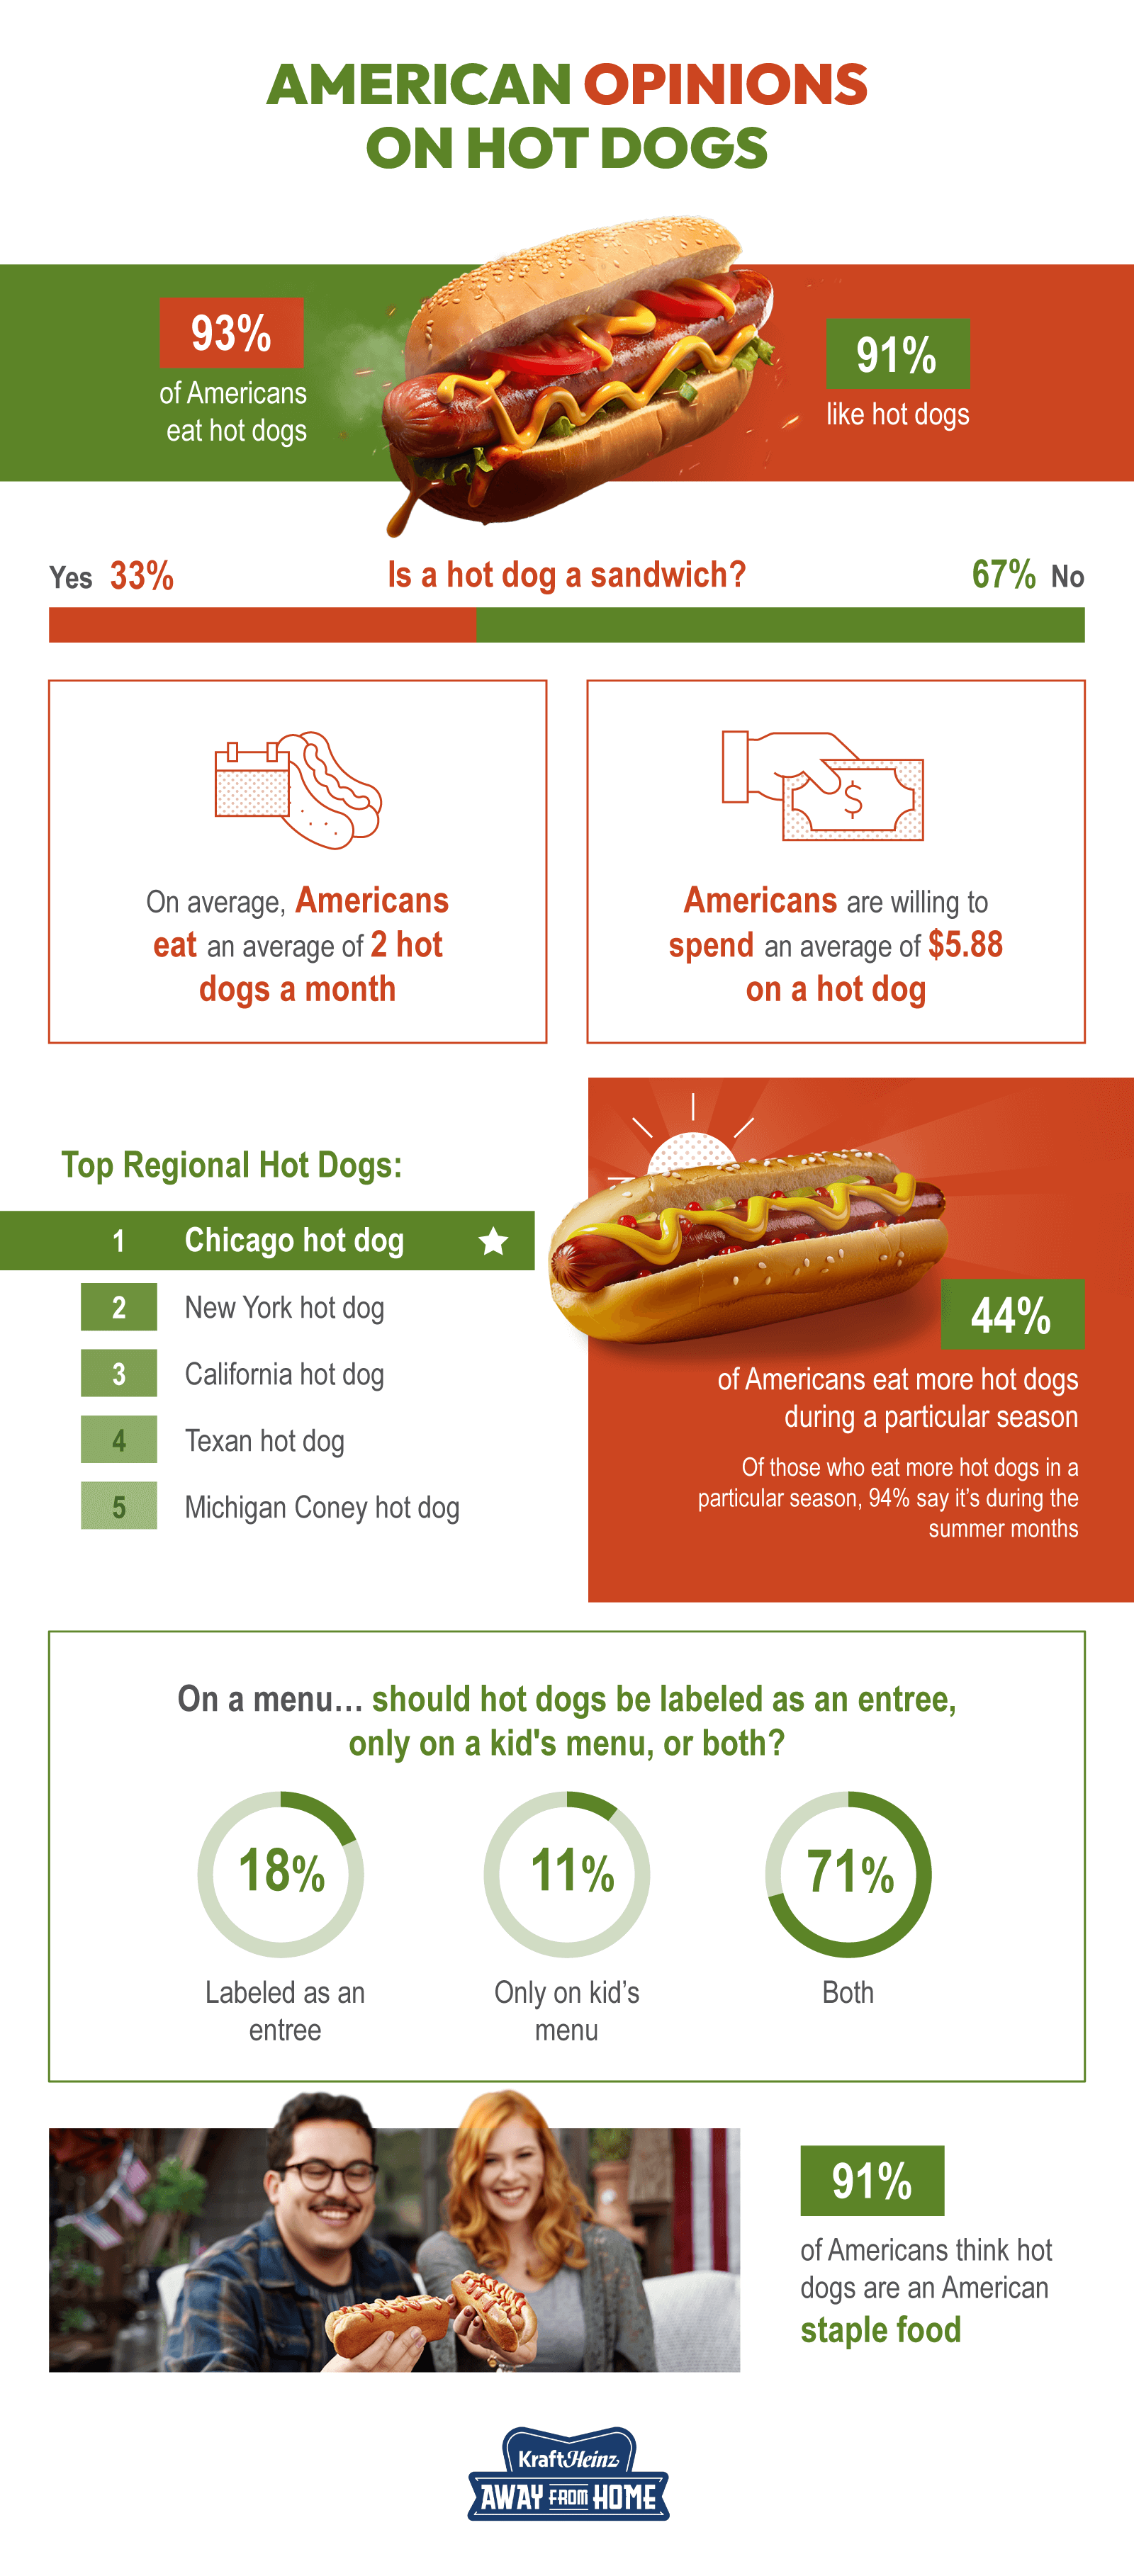 What do Americans think of the classic hot dog, and which style is their favorite? - Study from usfoods.com